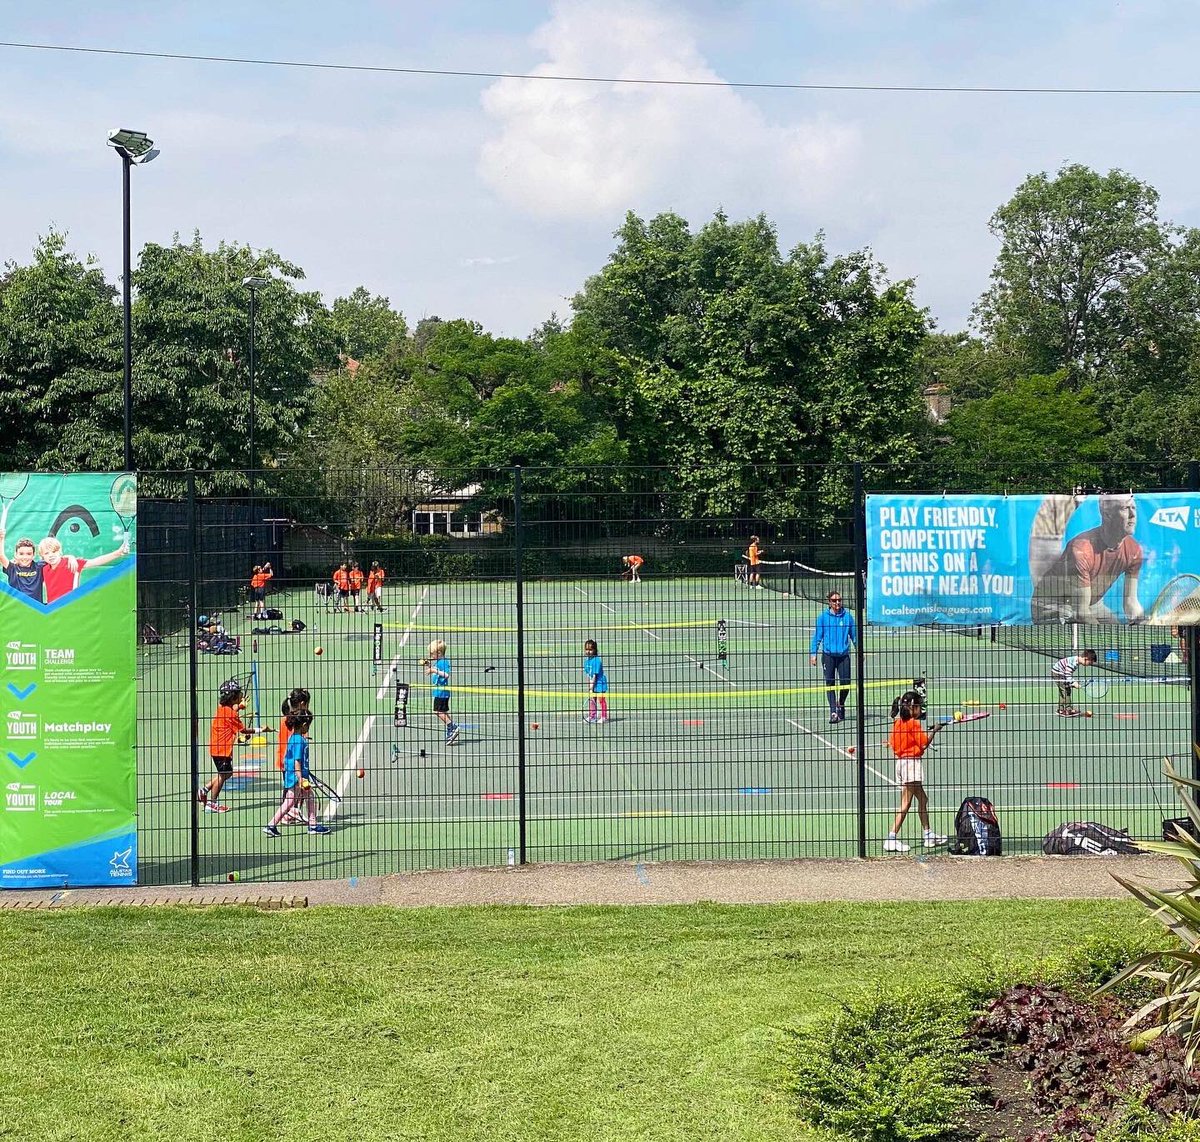 Camp goers at King George’s Park treated to a special guest this afternoon 🤩⁣ ⁣ It was amazing to have a visit from mixed doubles Wimbledon finalist, @harriet_dart! Fair to say our players were left feeling inspired 💪⁣ ⁣ 🎥 Catch the feature on ITV News at 6pm tonight!